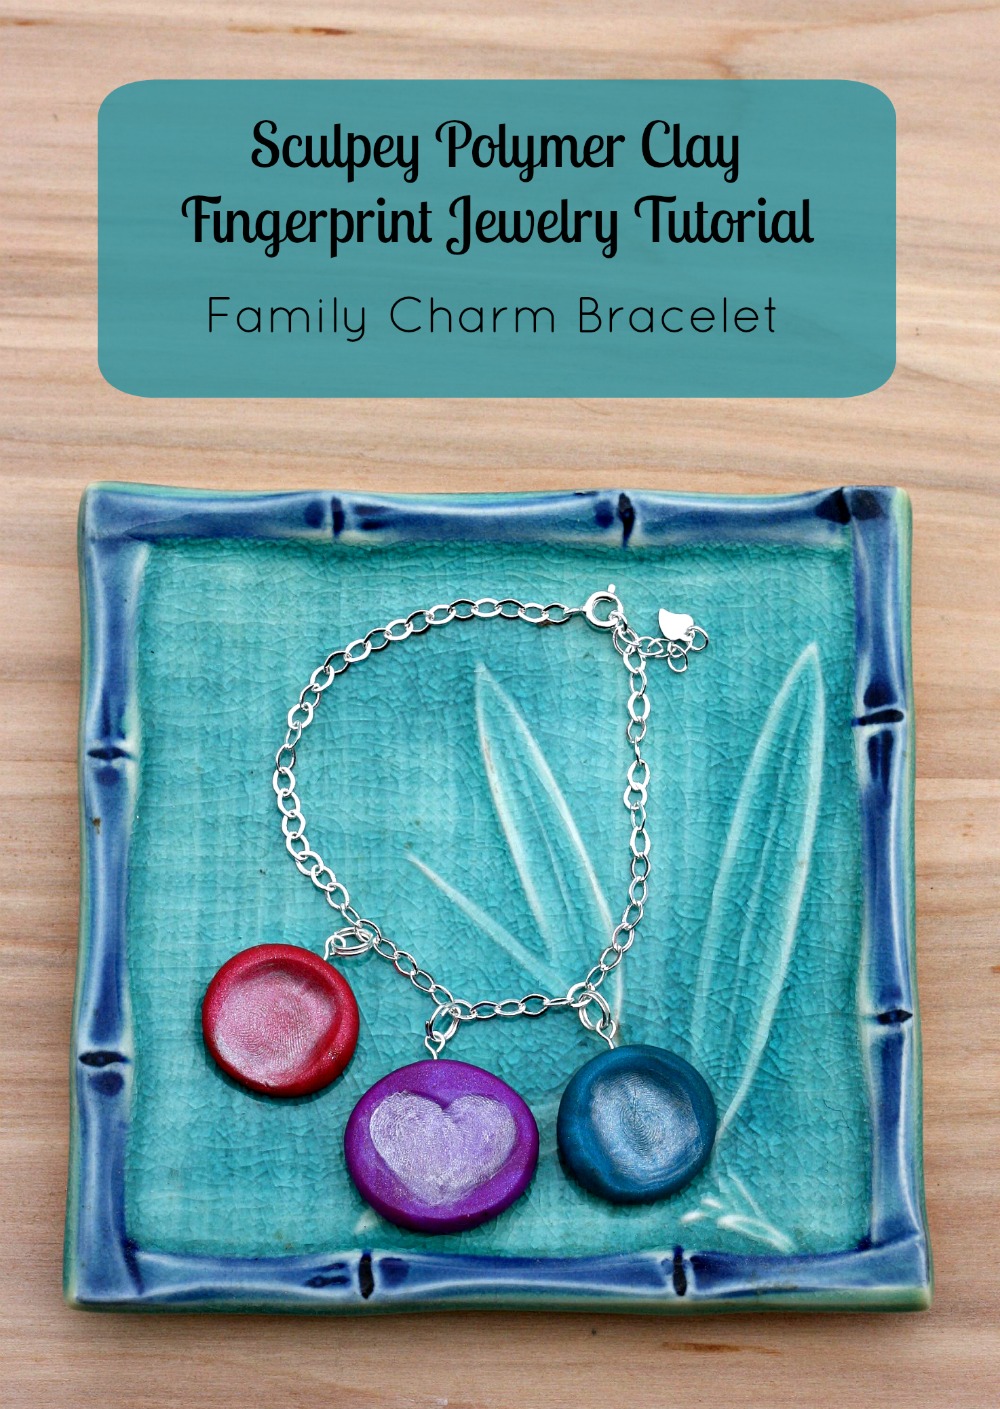 Hello Creative Family's Sculpey Polymer Clay Fingerprint Jewelry Tutorial- Family Charm Bracelet. A great handmade Mother's Day or Christmas gift that kids can craft and help make!